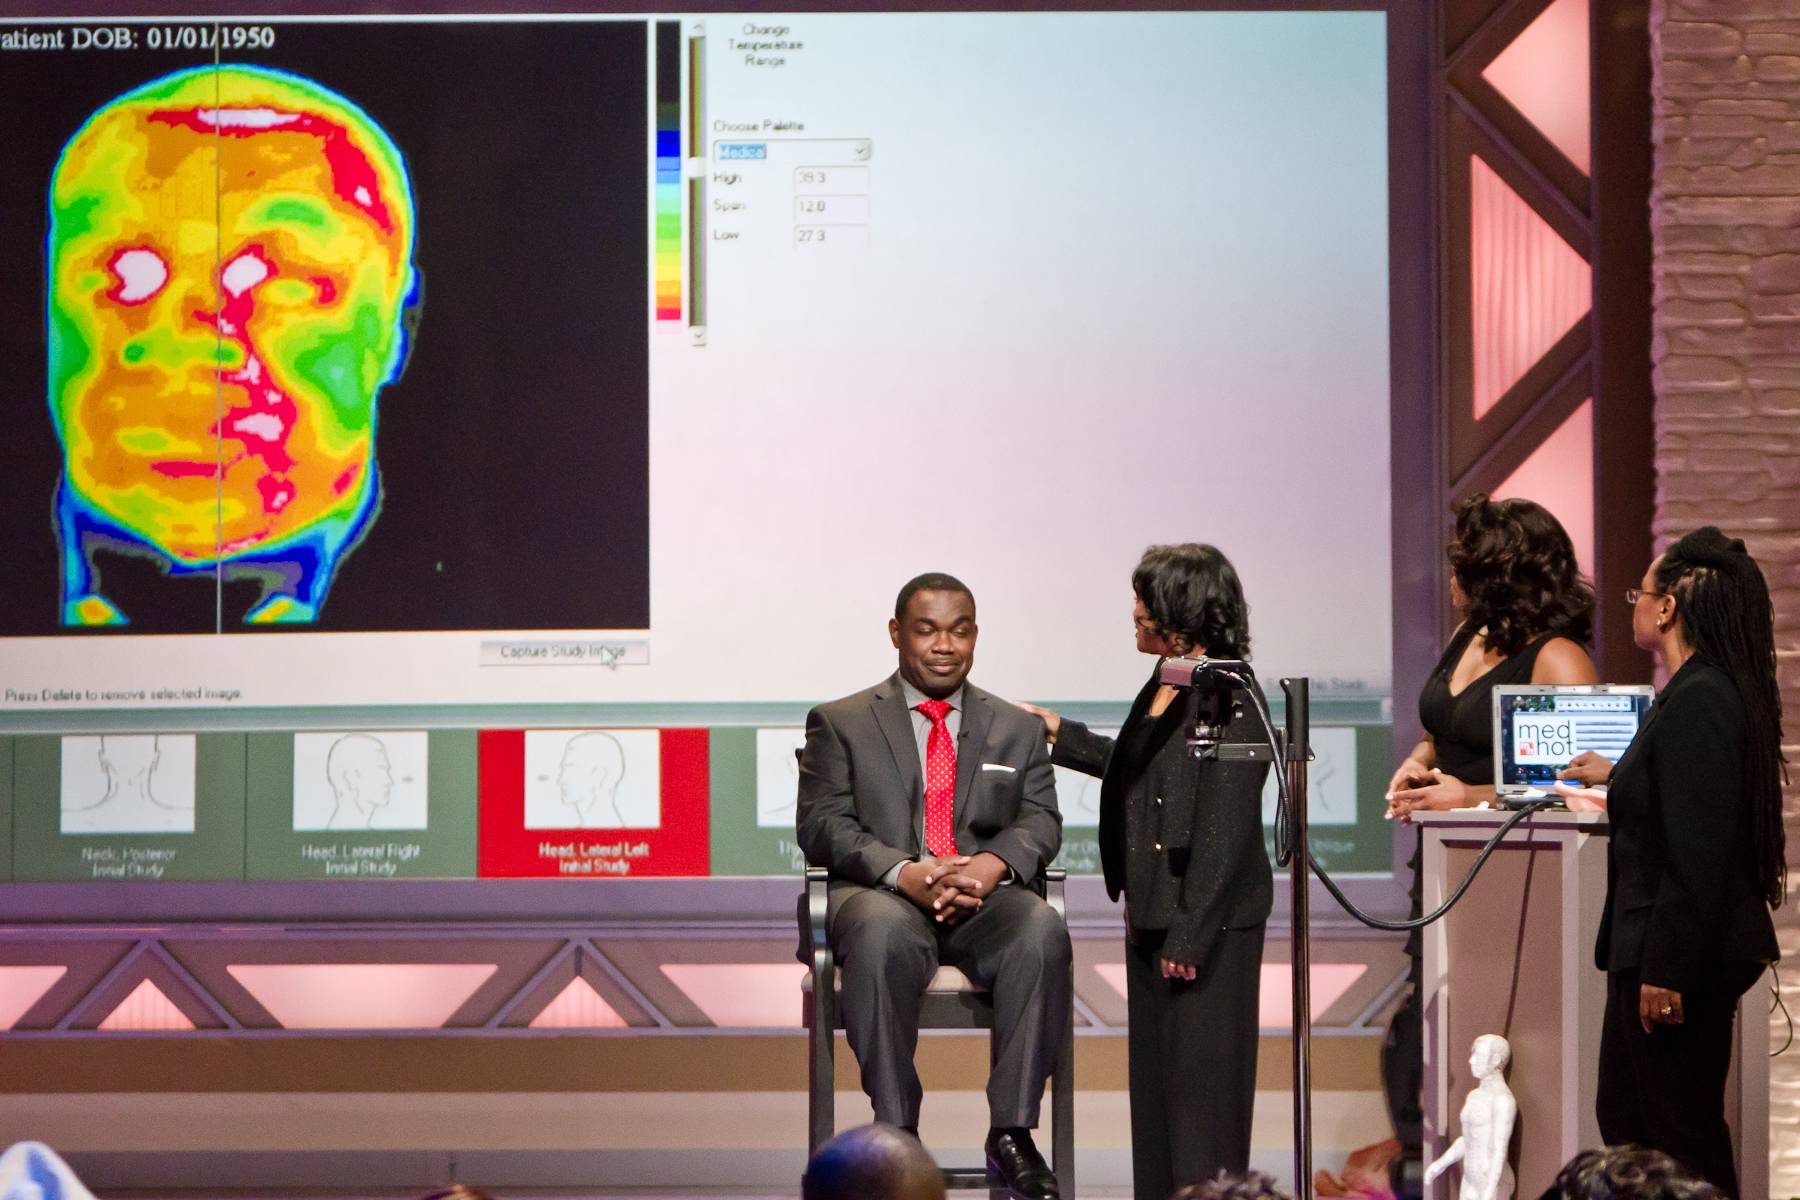 In Action - Dr. Robbins sets up Rodney on a thermography machine to show the audience what she does in practice.(Photo: Darnell Williams/BET)